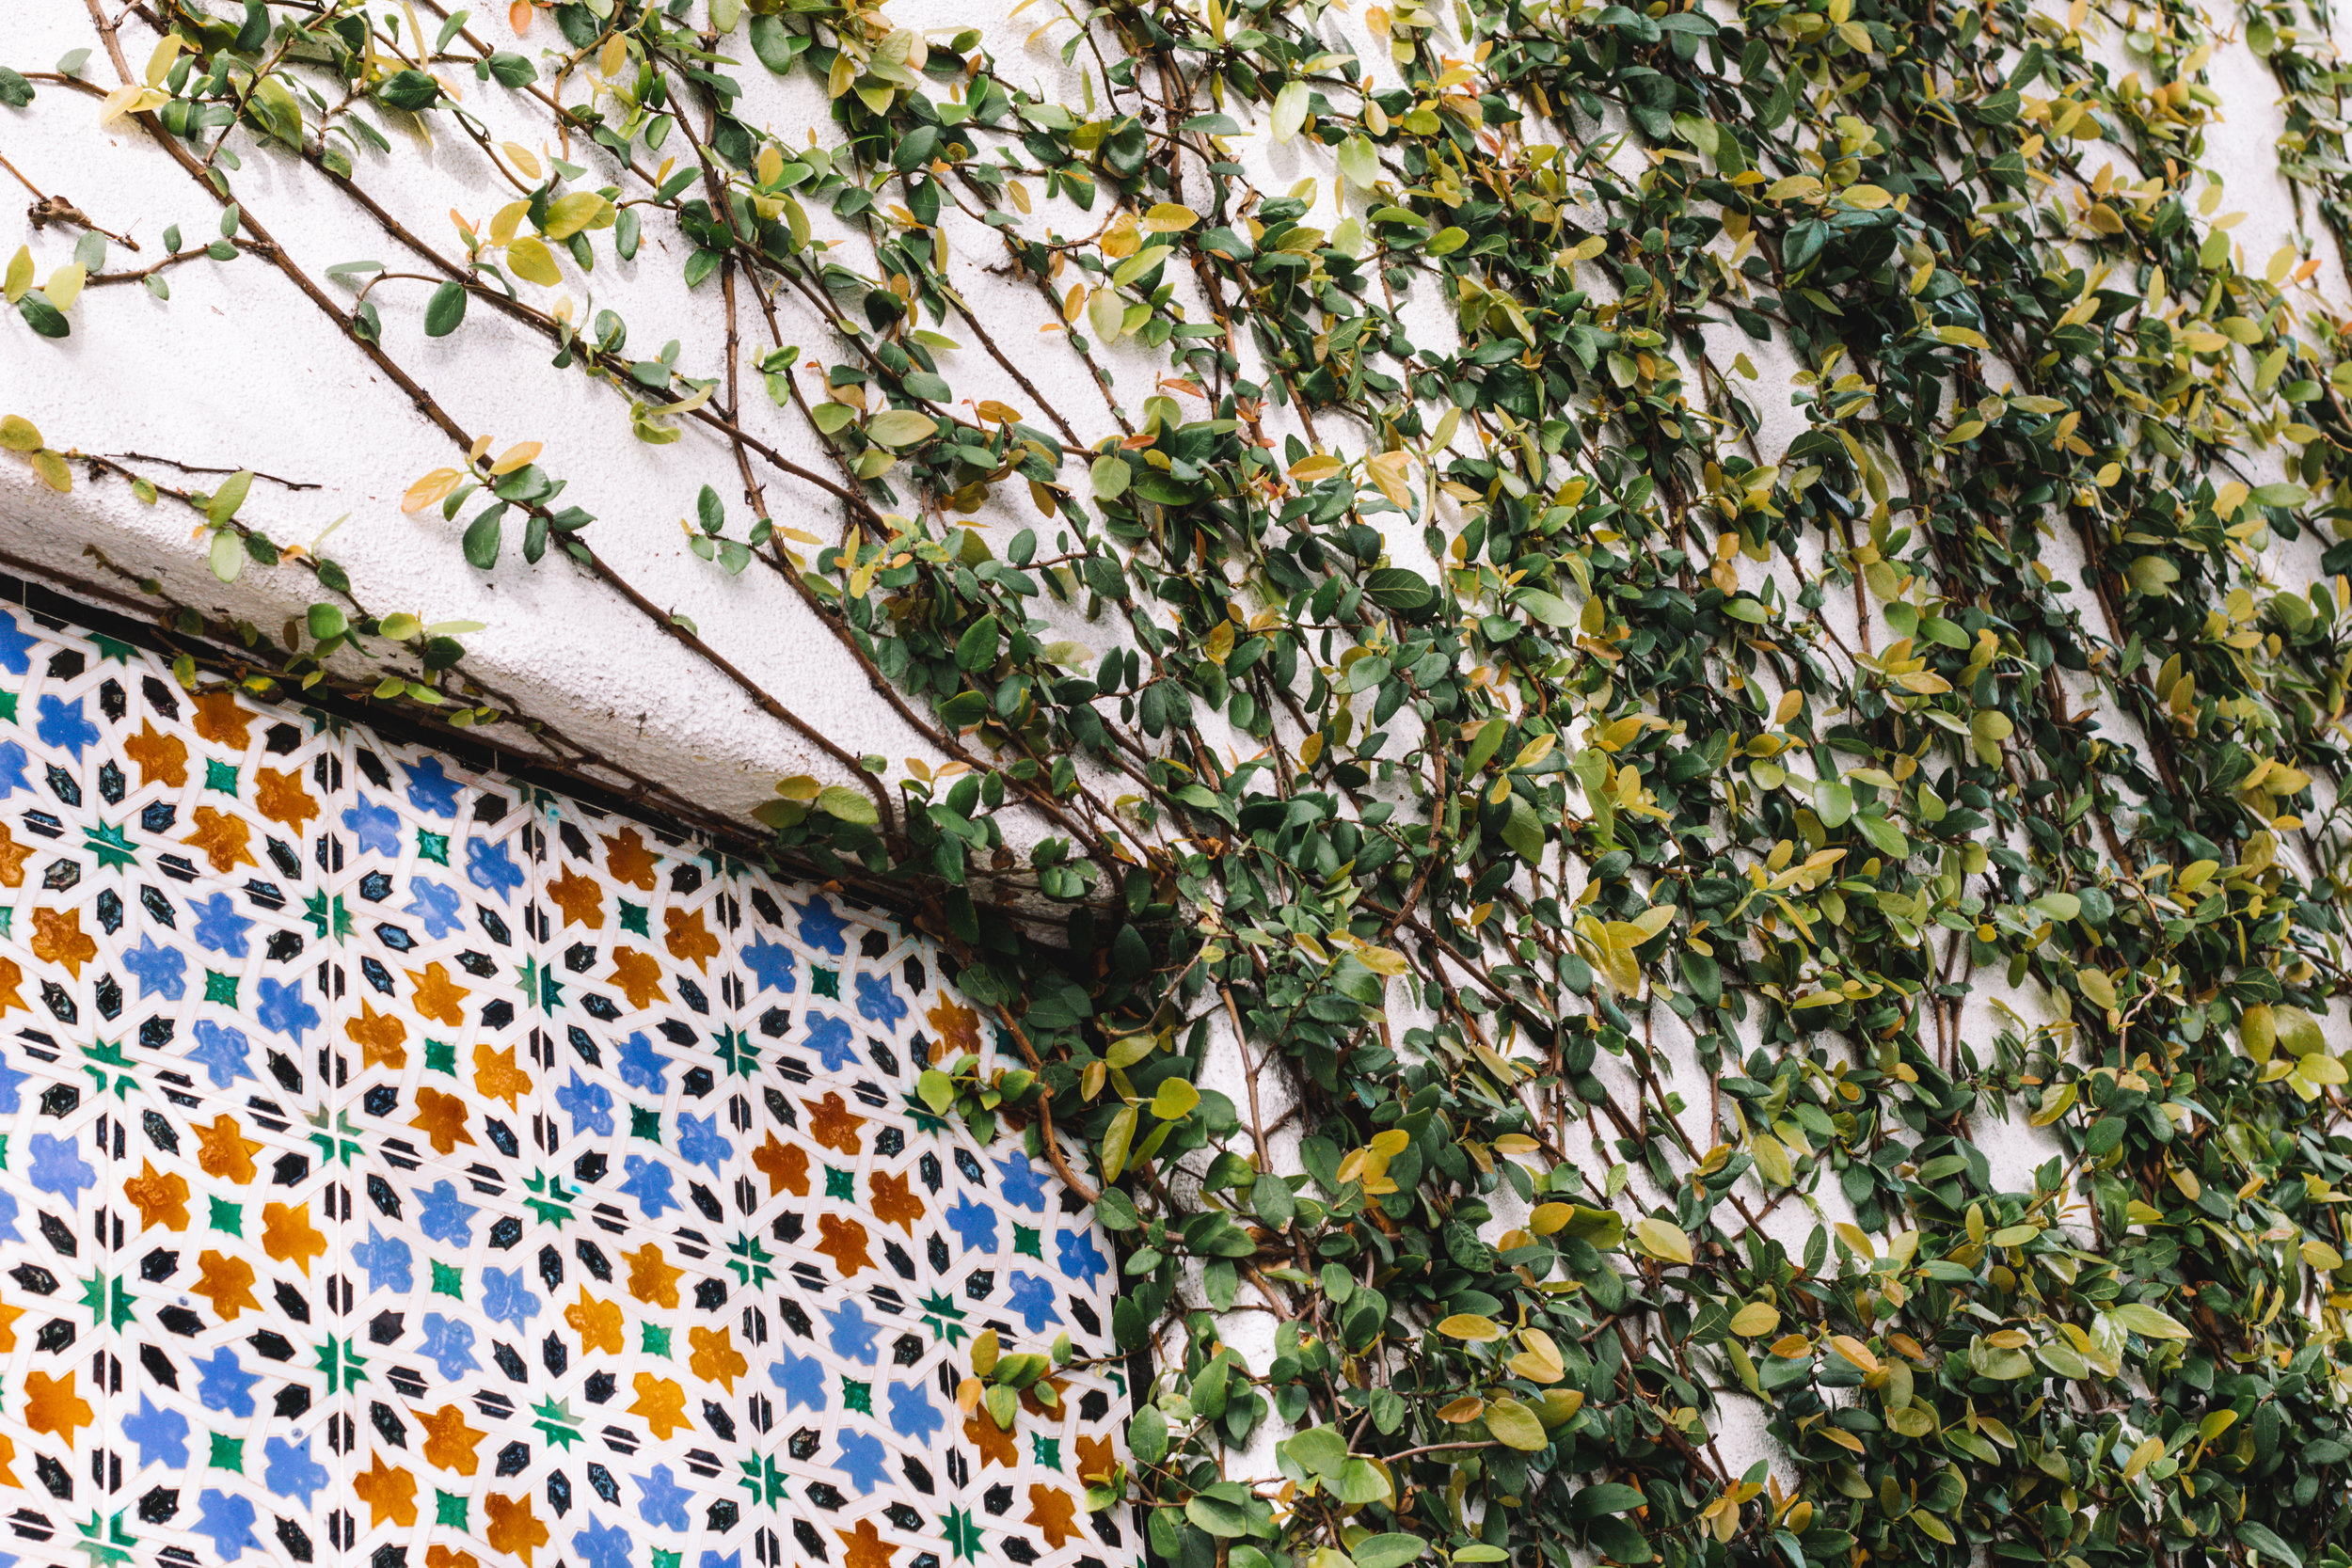 Mexican Tile and Ivy in Carmel, California | Beyond Ordinary Guides